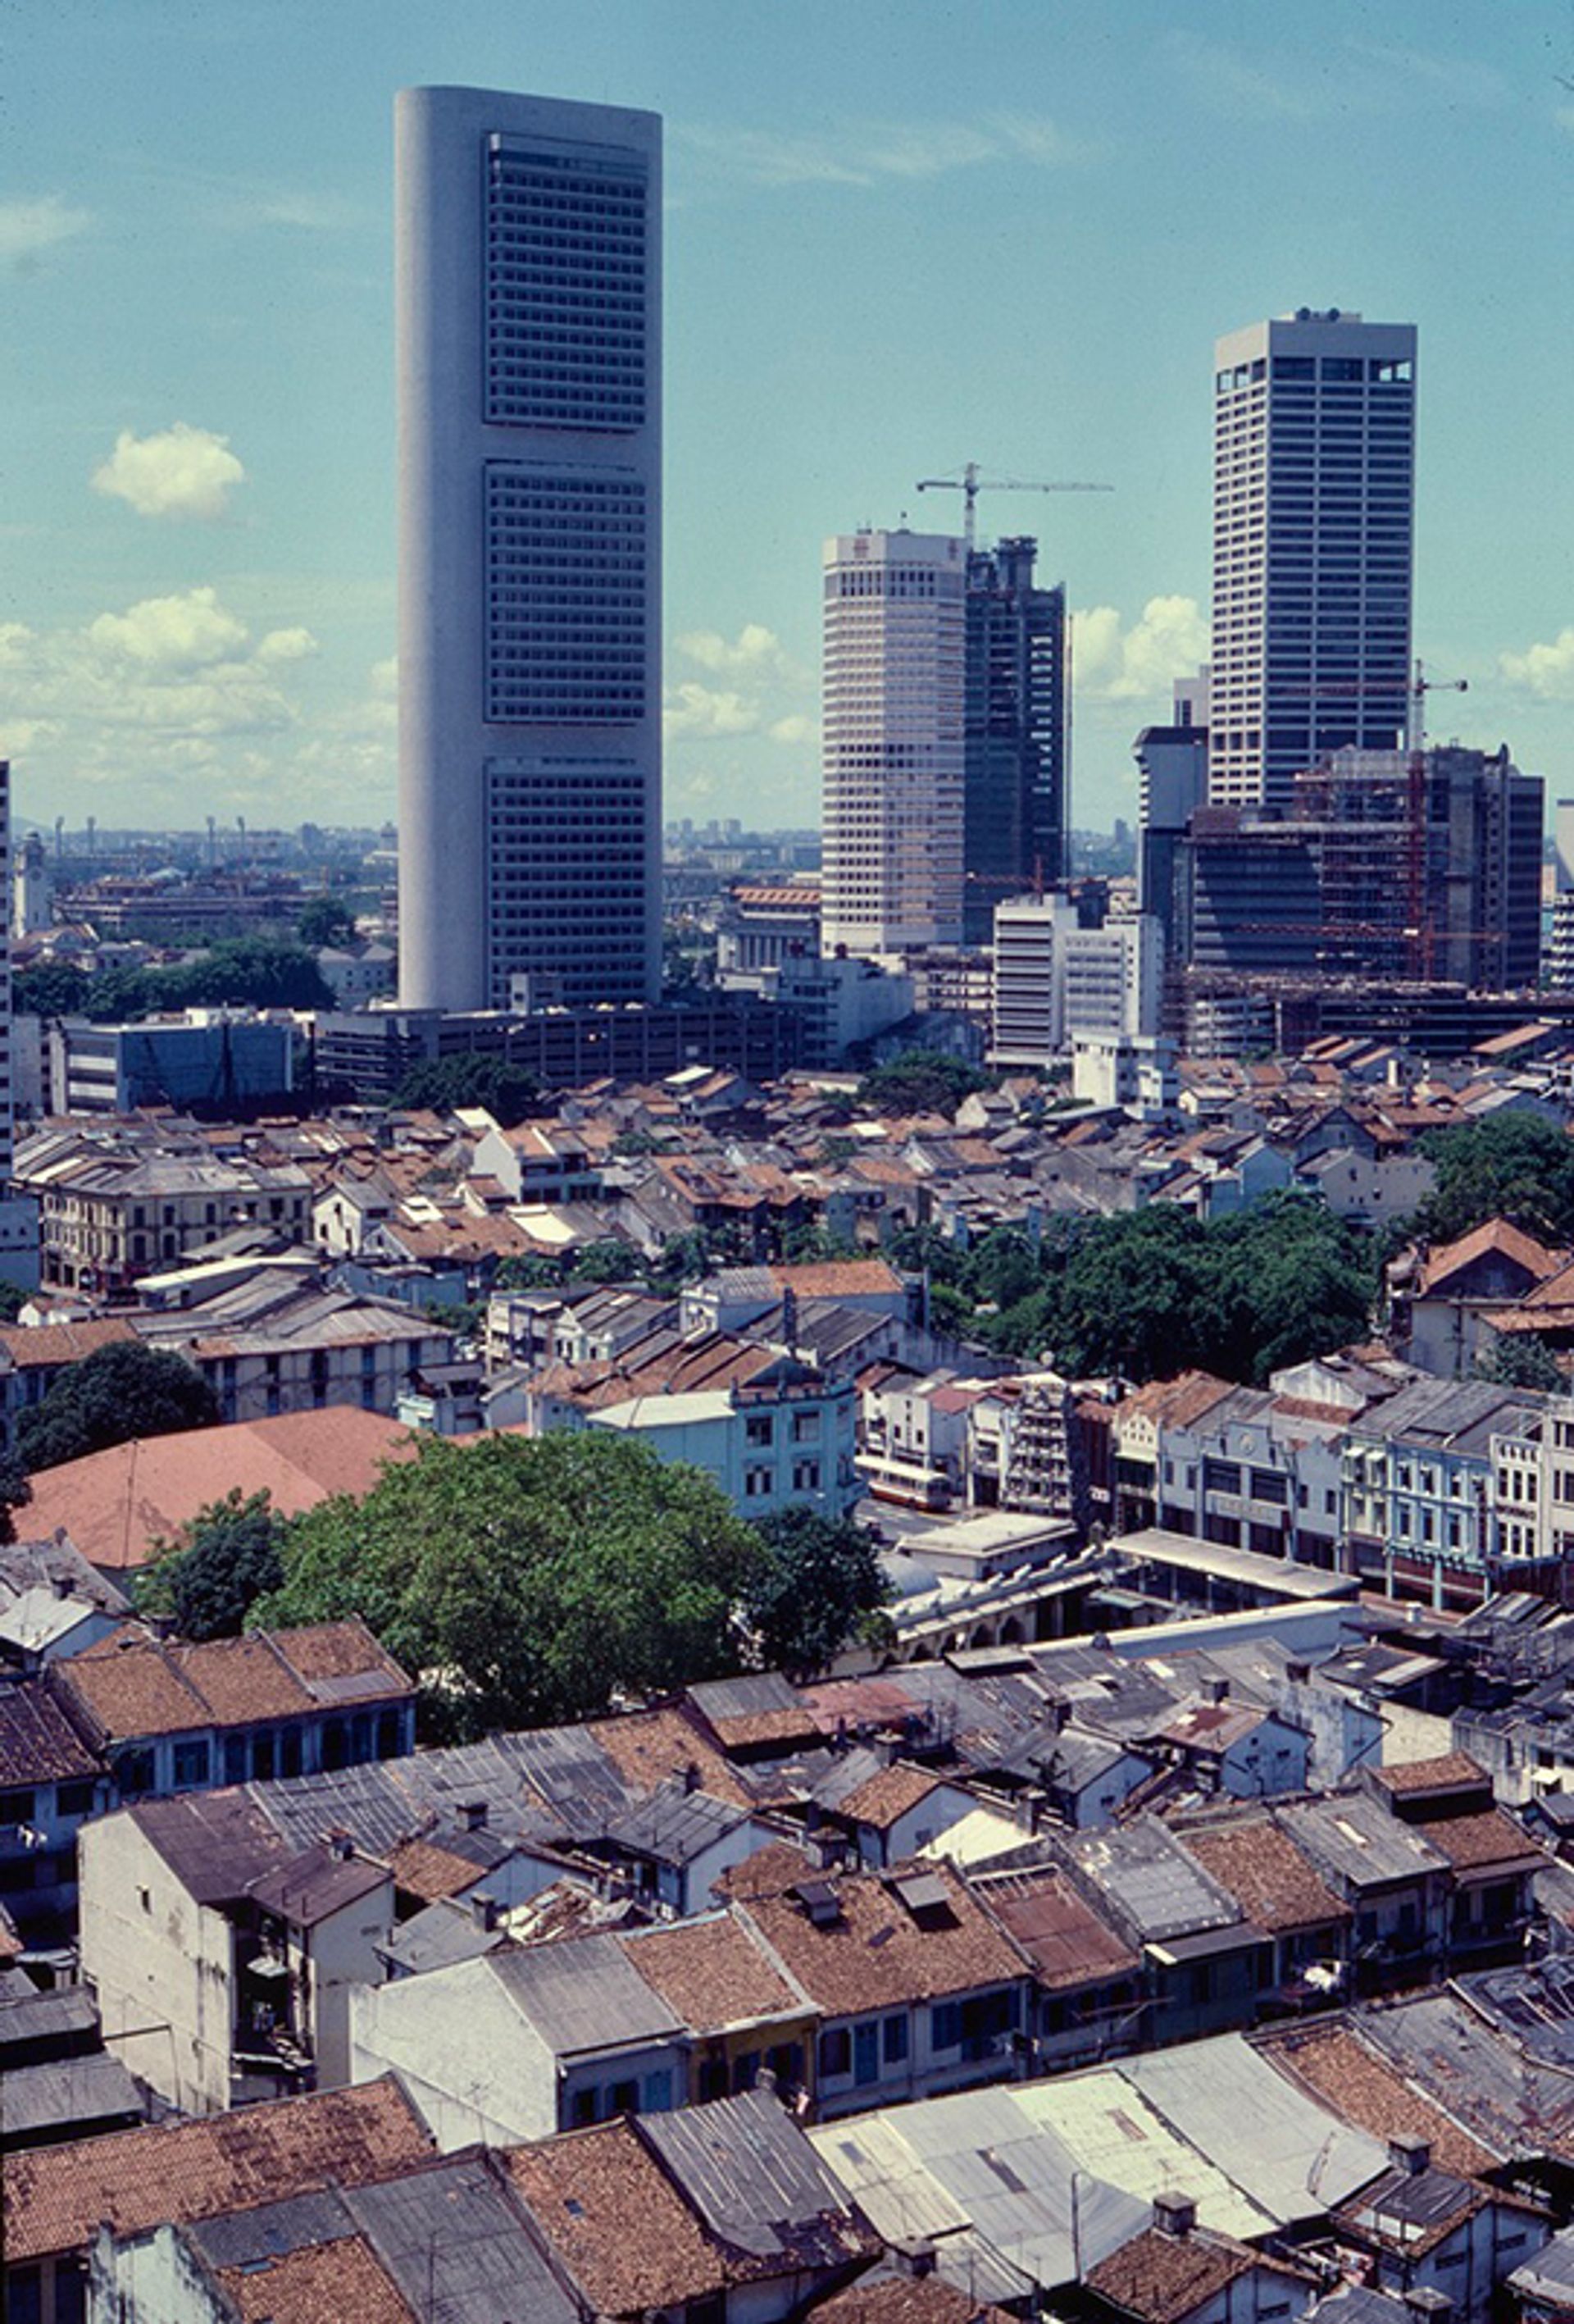 An aerial view of part of Chinatown from People’s Park Centre, looking down towards Boat Quay whose skyline is dominated by the OCBC Centre, circa 1975. The Sri Mariamman Temple on South Bridge Road can be seen in the foreground.